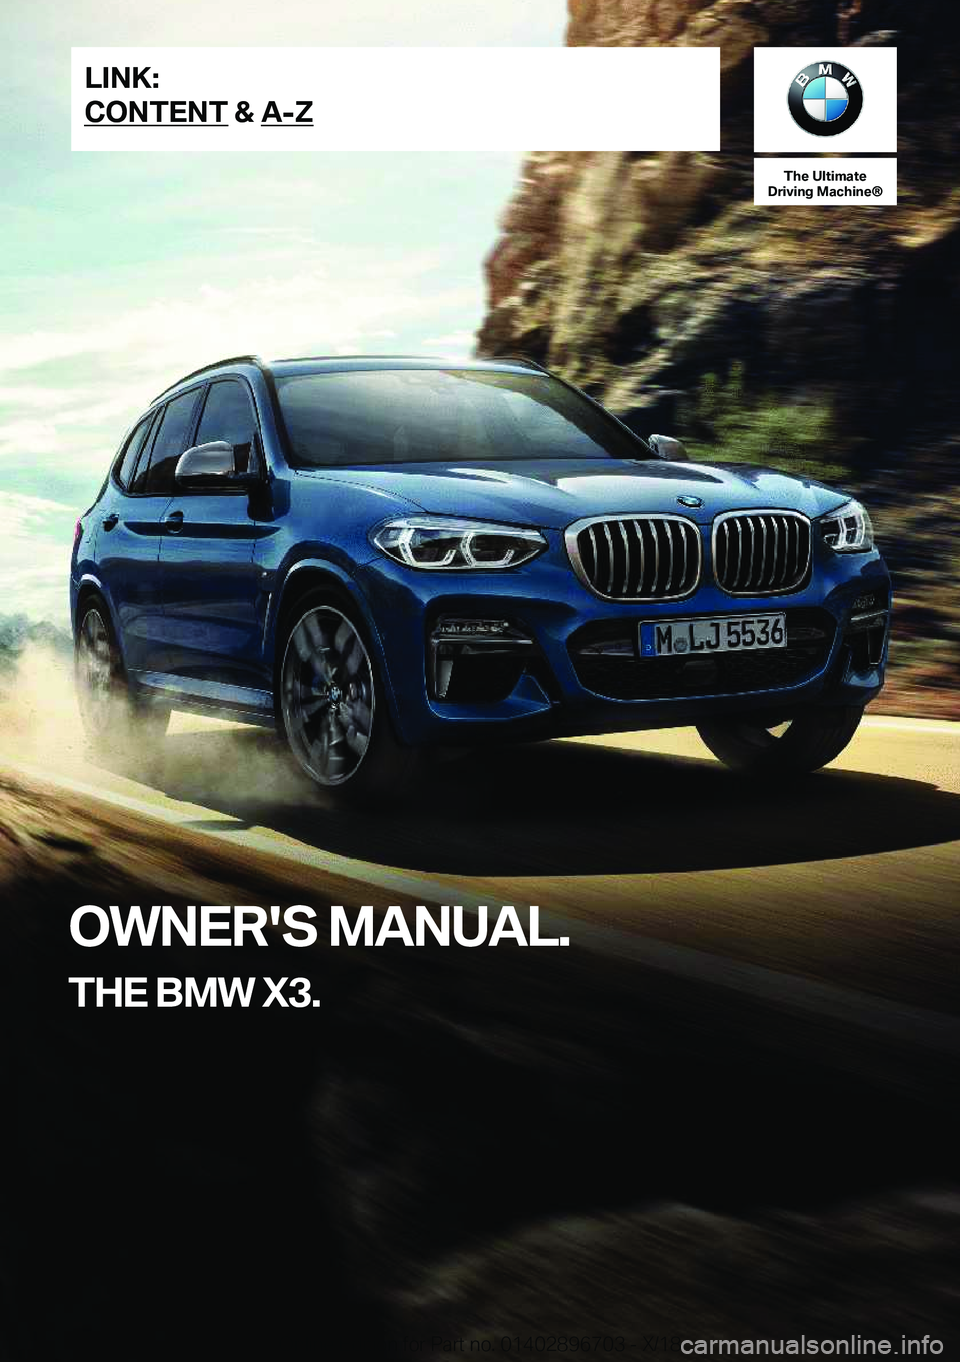 BMW X3 2019  Owners Manual �T�h�e��U�l�t�i�m�a�t�e
�D�r�i�v�i�n�g��M�a�c�h�i�n�e�n
�O�W�N�E�R�'�S��M�A�N�U�A�L�.
�T�H�E��B�M�W��X�3�.�L�I�N�K�:
�C�O�N�T�E�N�T��&��A�-�Z�O�n�l�i�n�e��E�d�i�t�i�o�n��f�o�r��P�a�r�t�